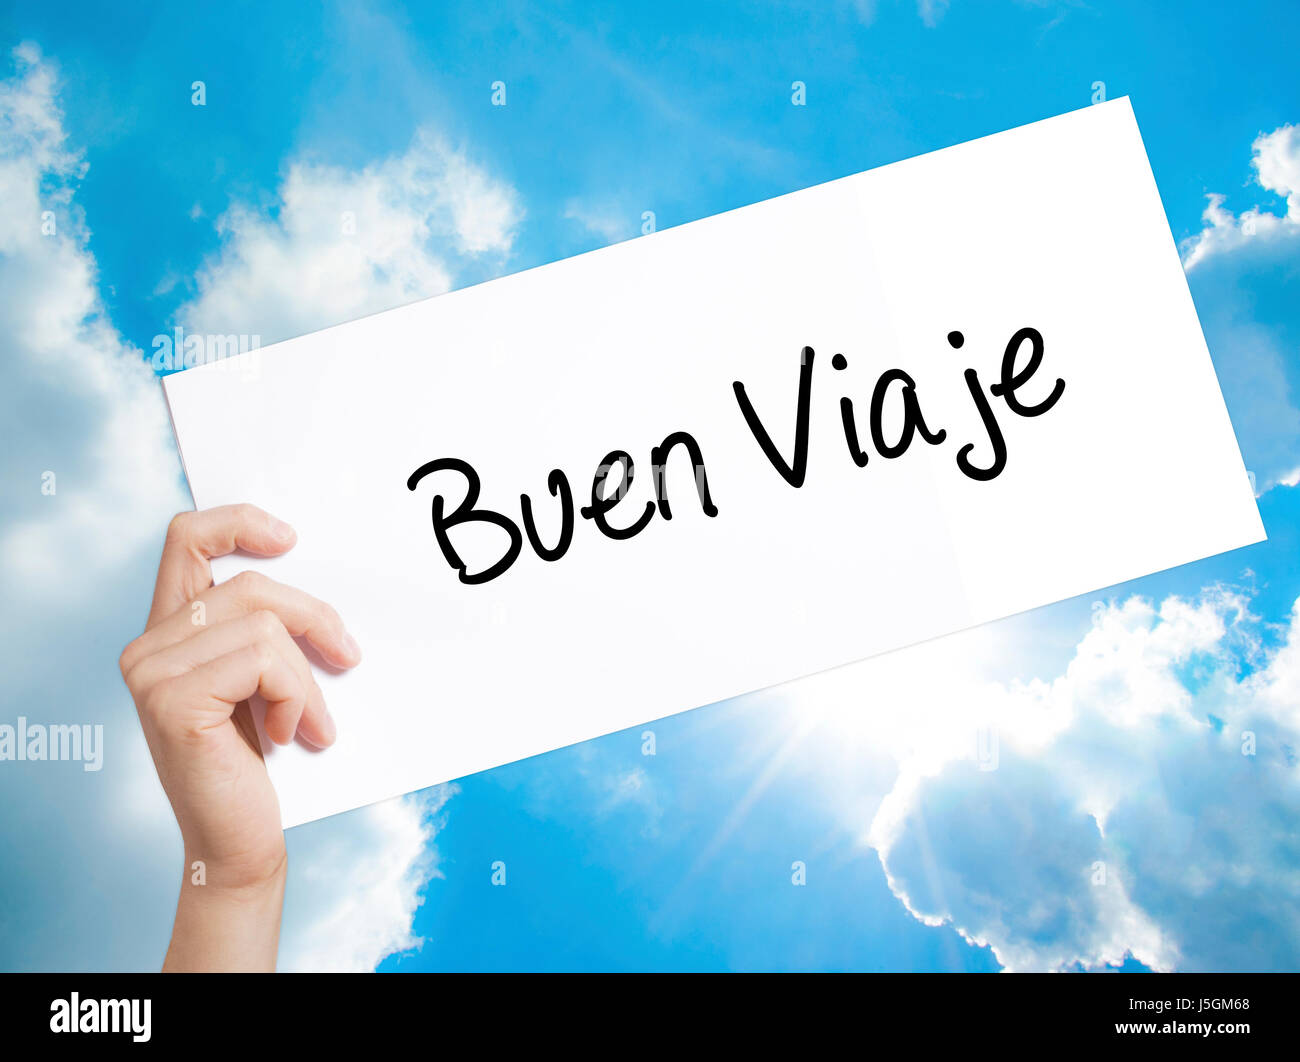 Buen Viaje (Good Trip in Spanish) Sign on white paper. Man Hand Holding Paper with text. Isolated on sky background.   Business concept. Stock Photo Stock Photo